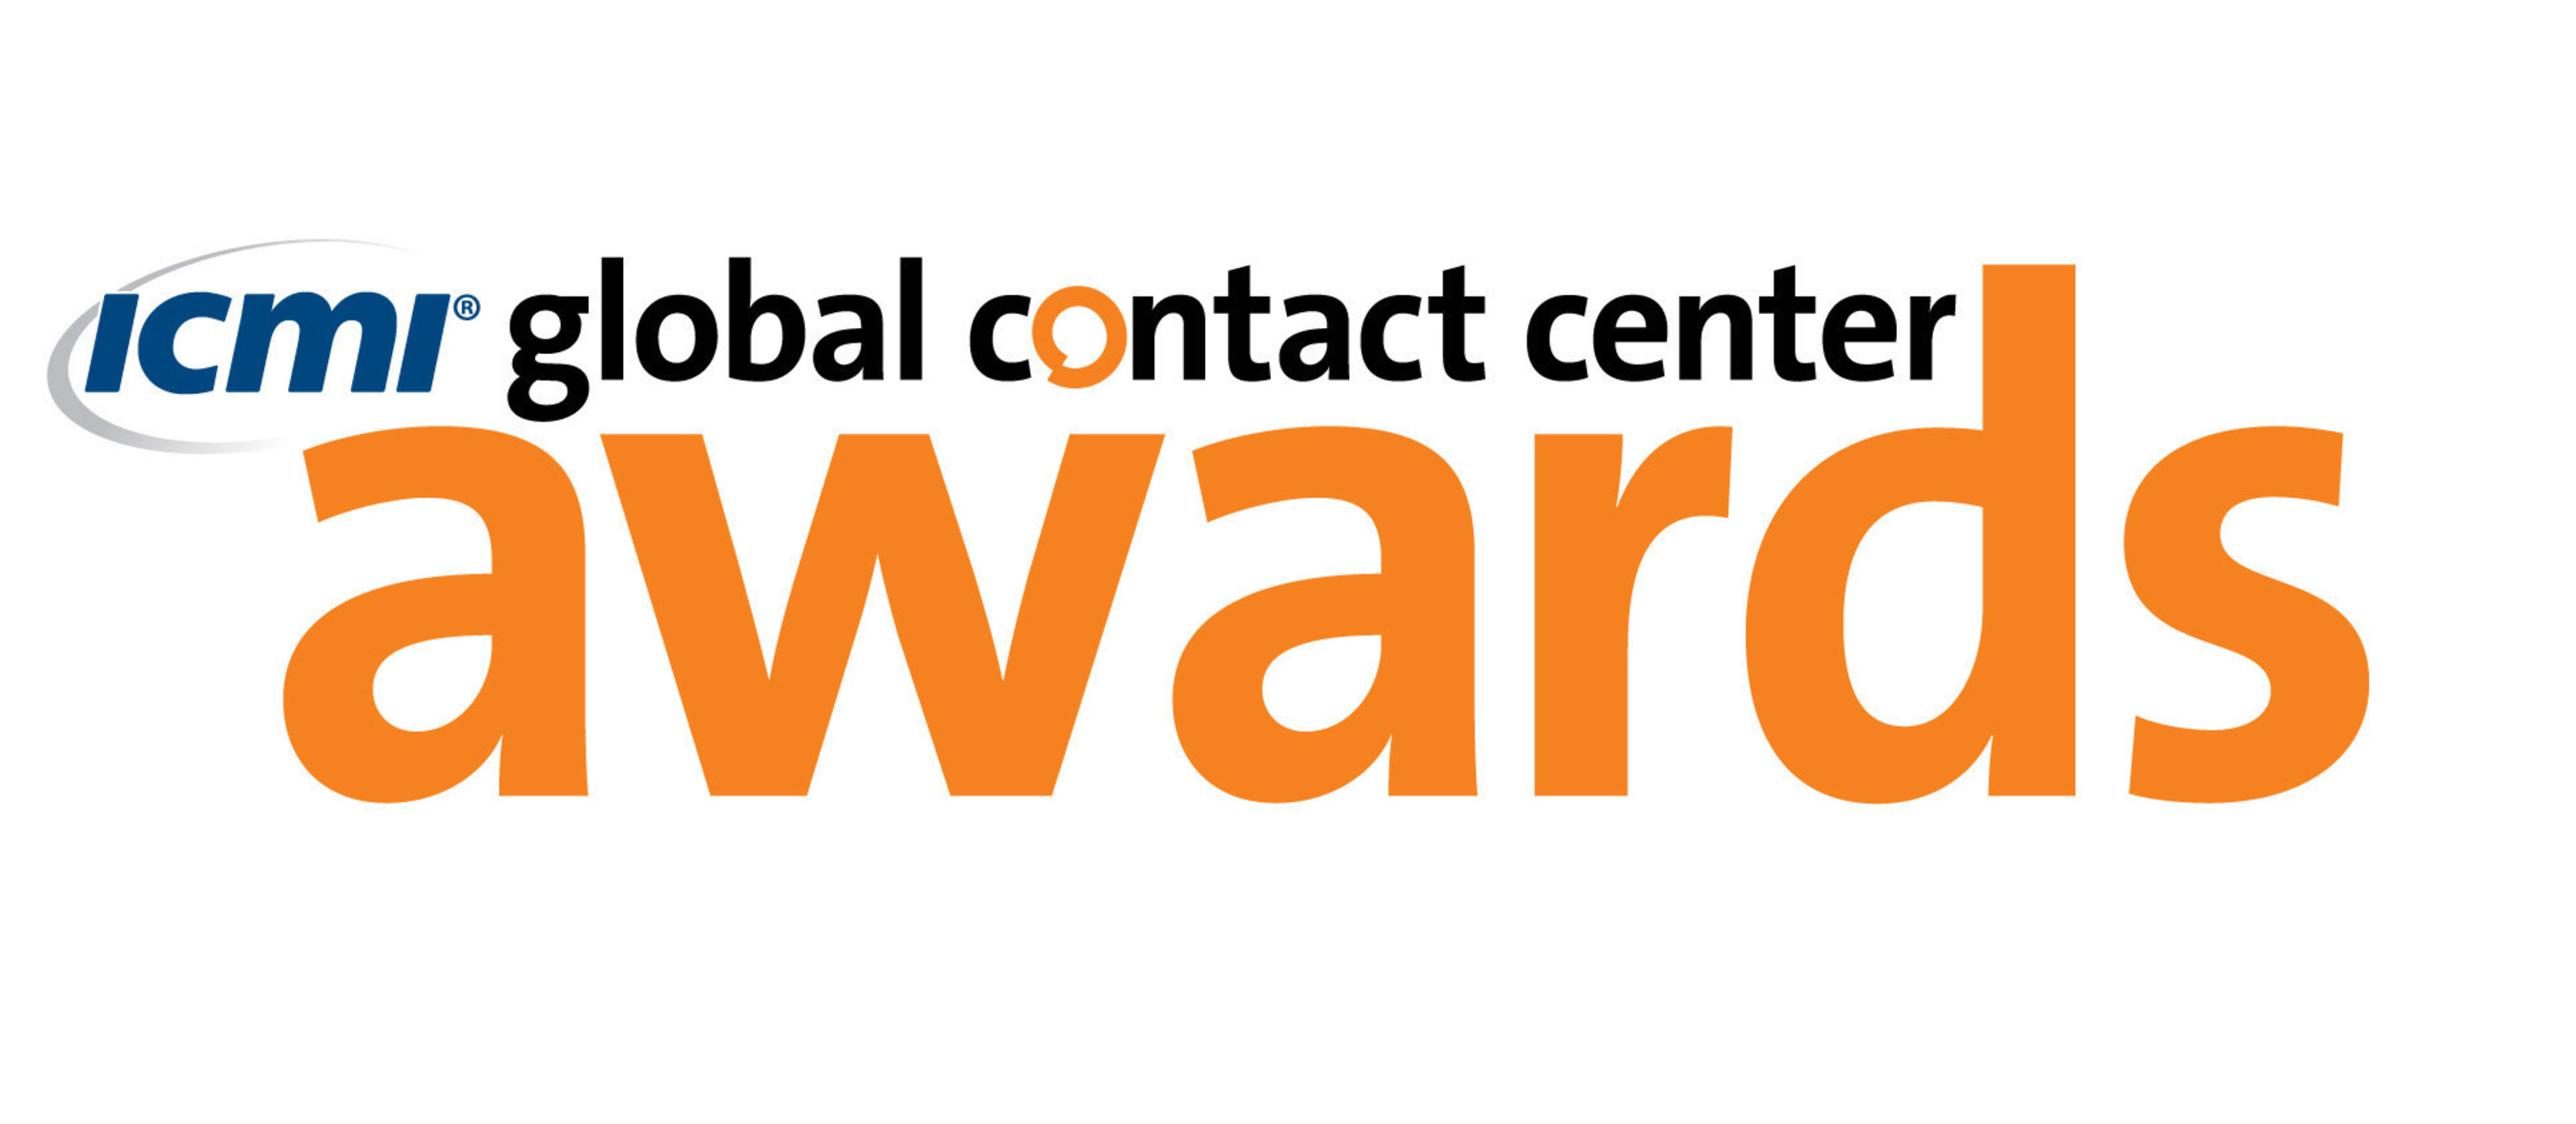 The Global Contact Center Awards Party will take place May 5, 2015 in conjunction with ICMI's Contact Center Expo & Conference in Orlando.